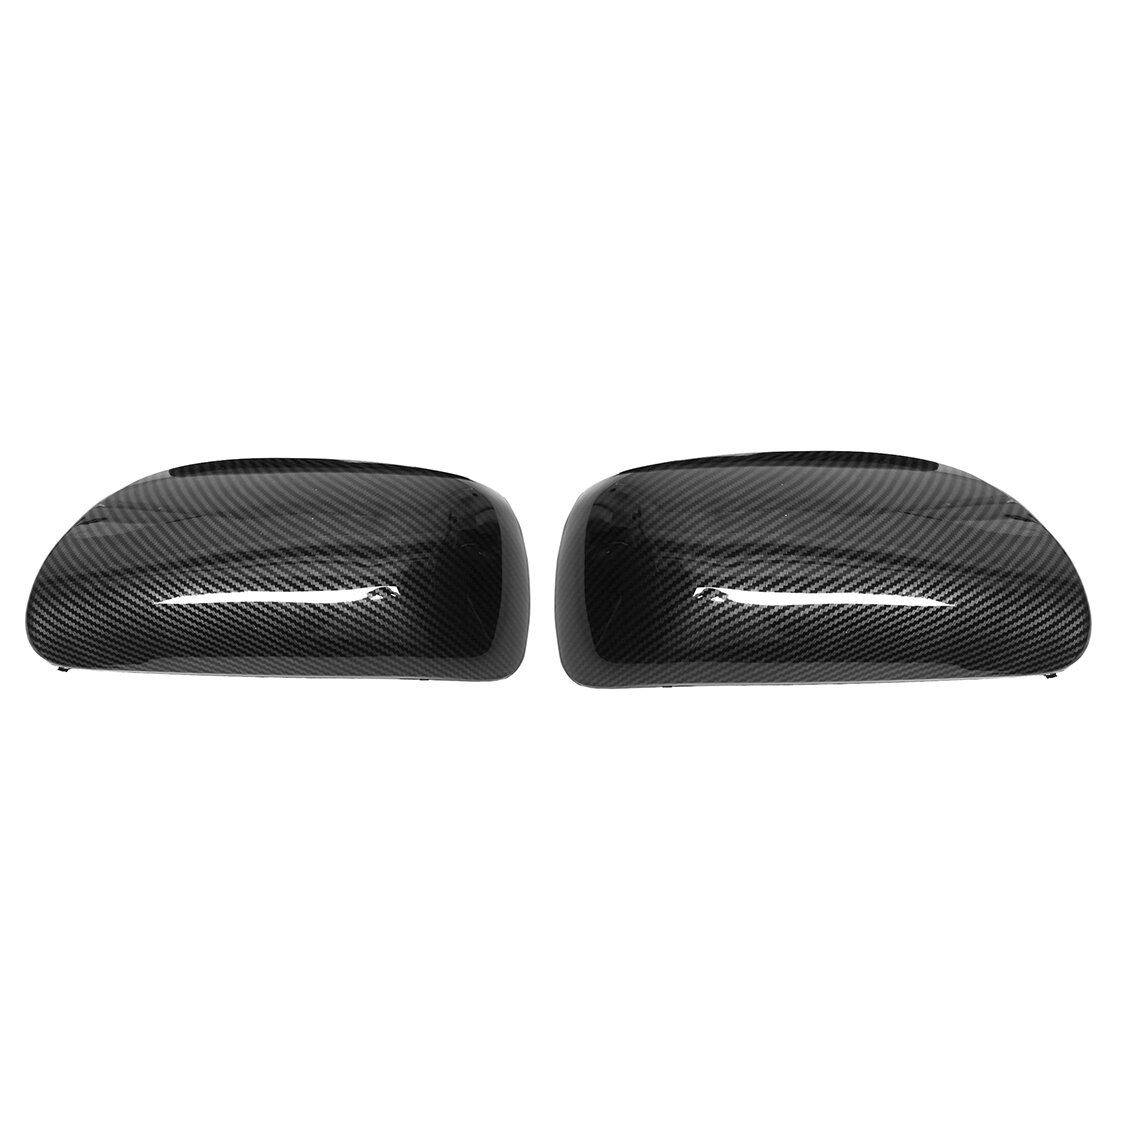 Rear View Side Mirror Cover Carbon Style For Toyota 2007-11 Yaris 2004-09 Prius